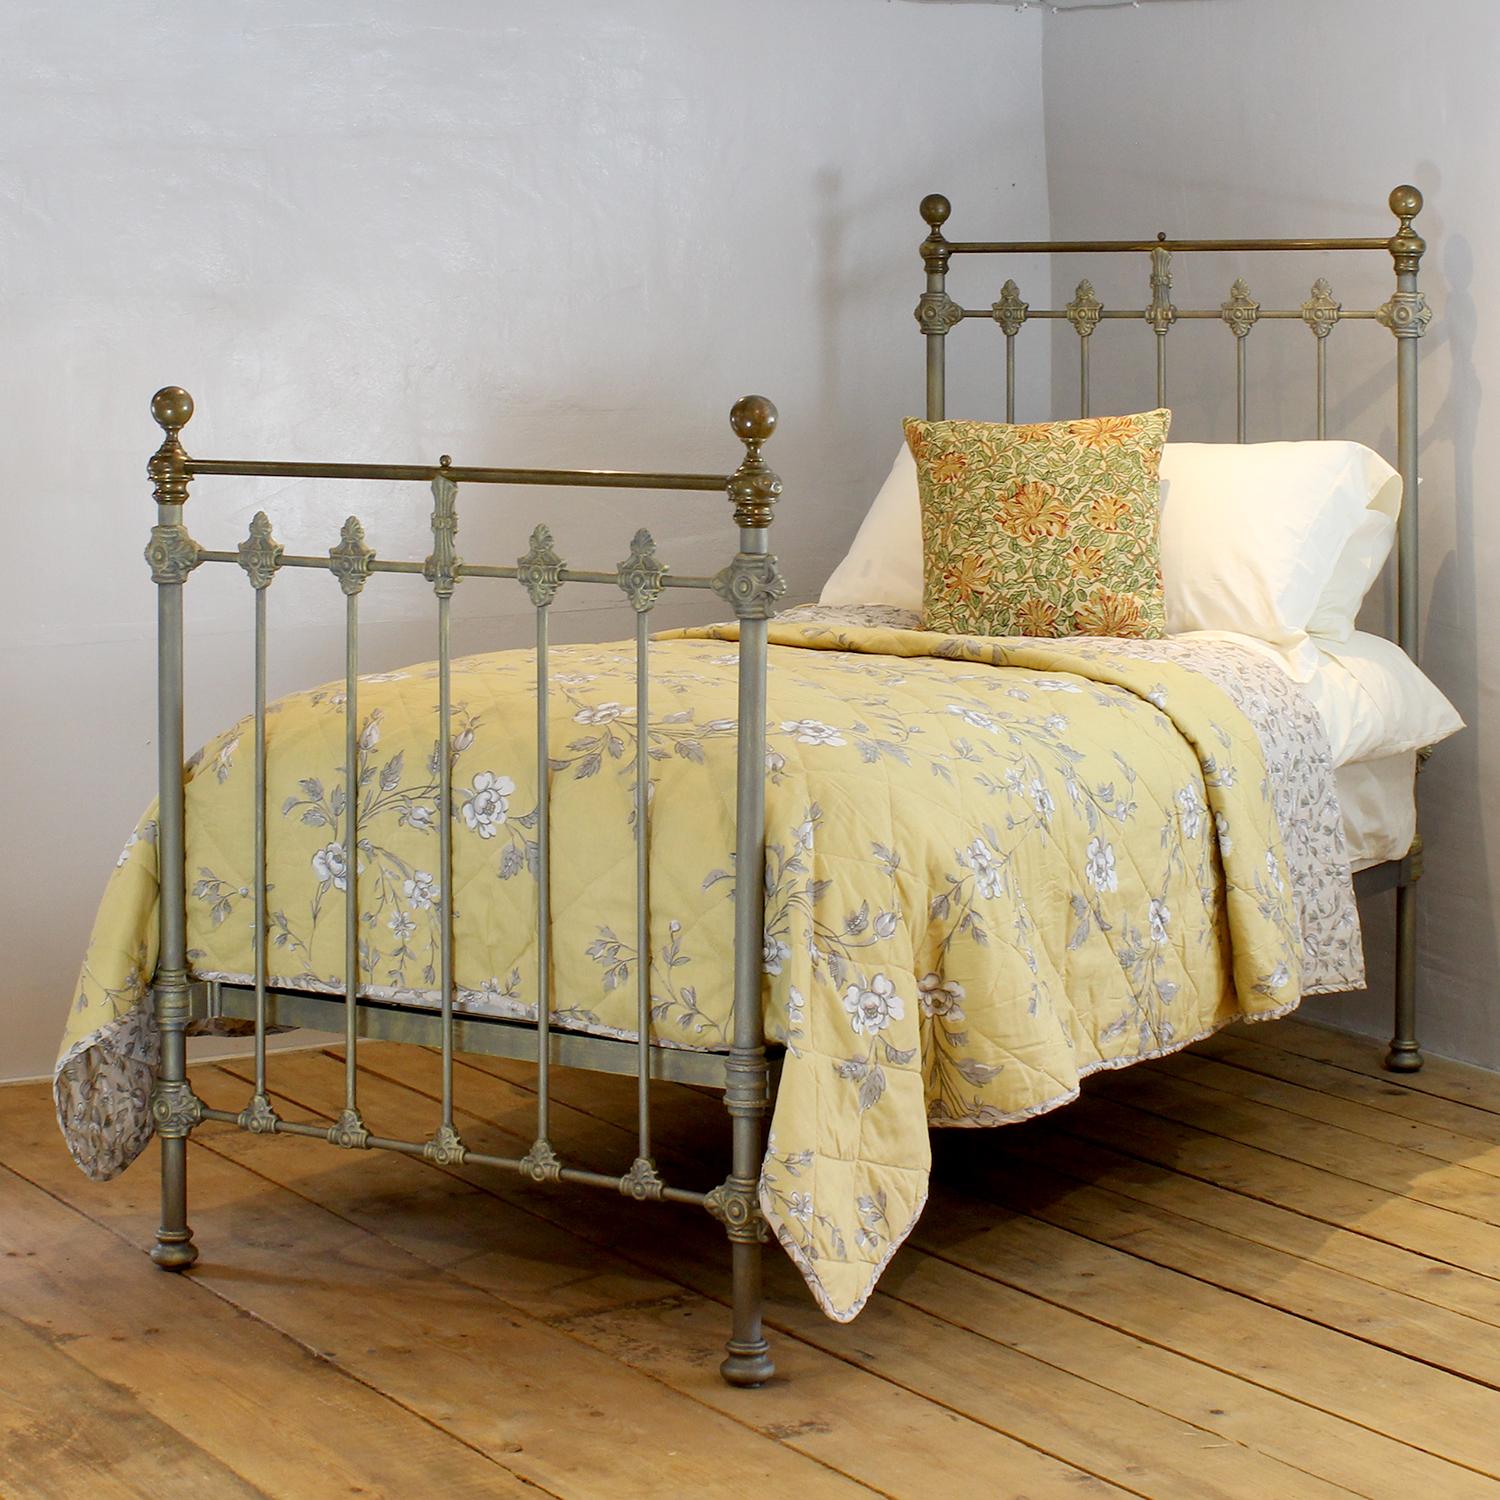 A traditional single Victorian brass and iron antique bed in hand-painted faded gold, with tarnished brass top rail, brass collars and round knobs.
This fine original antique bed from the late Victorian era has attractive castings, which have been